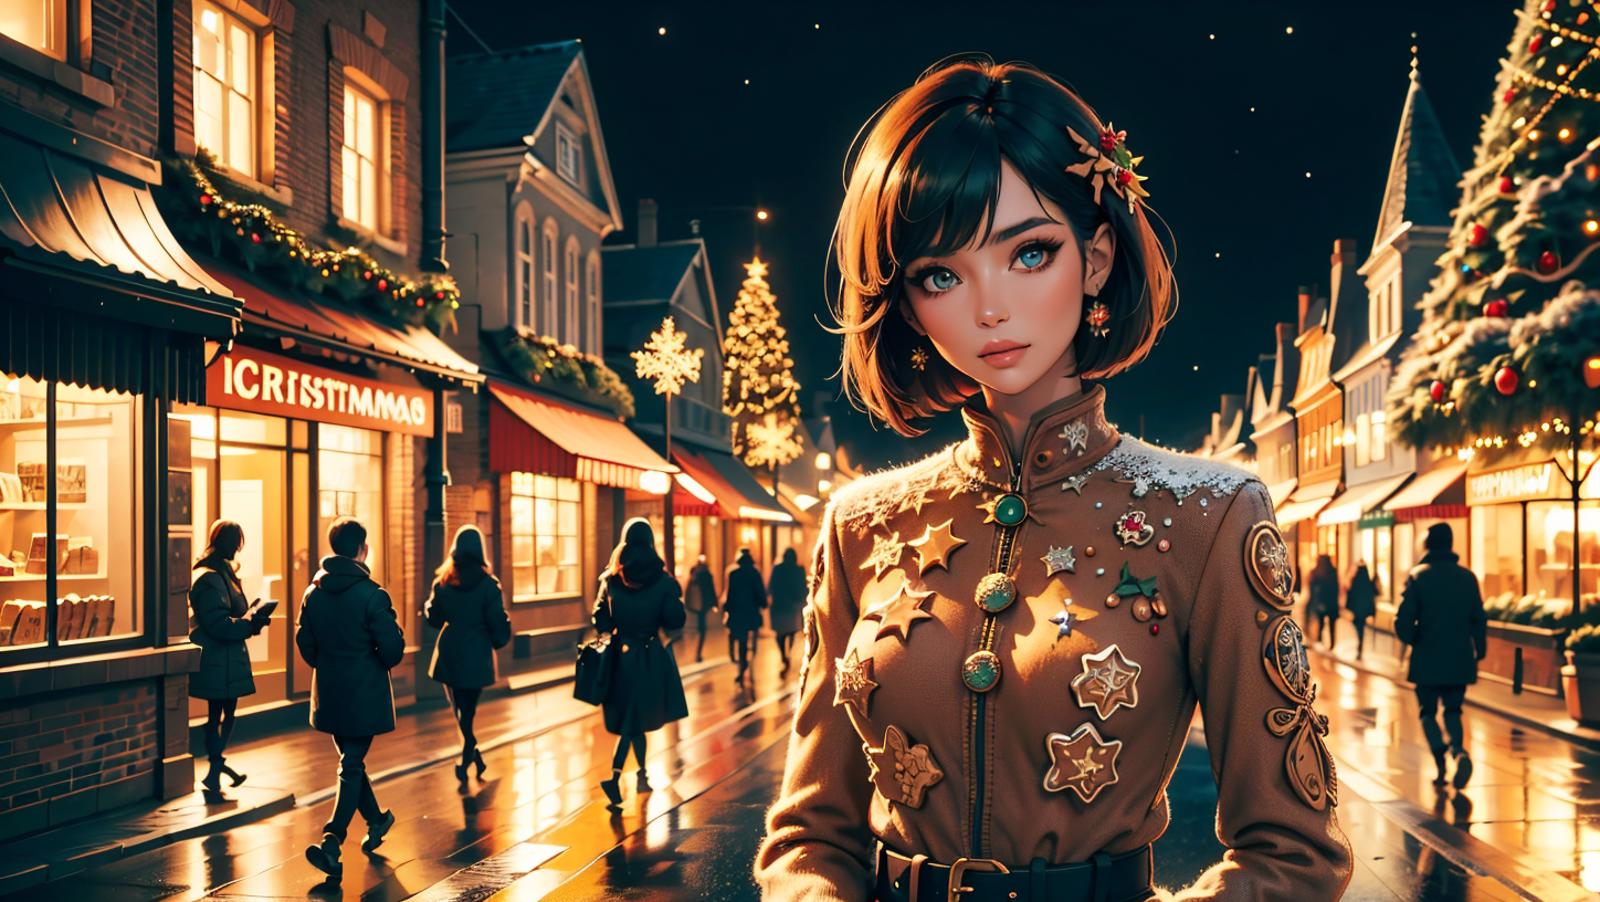 🎄🍪Gingerbread Fashion🍪🎄 image by Vovaldi